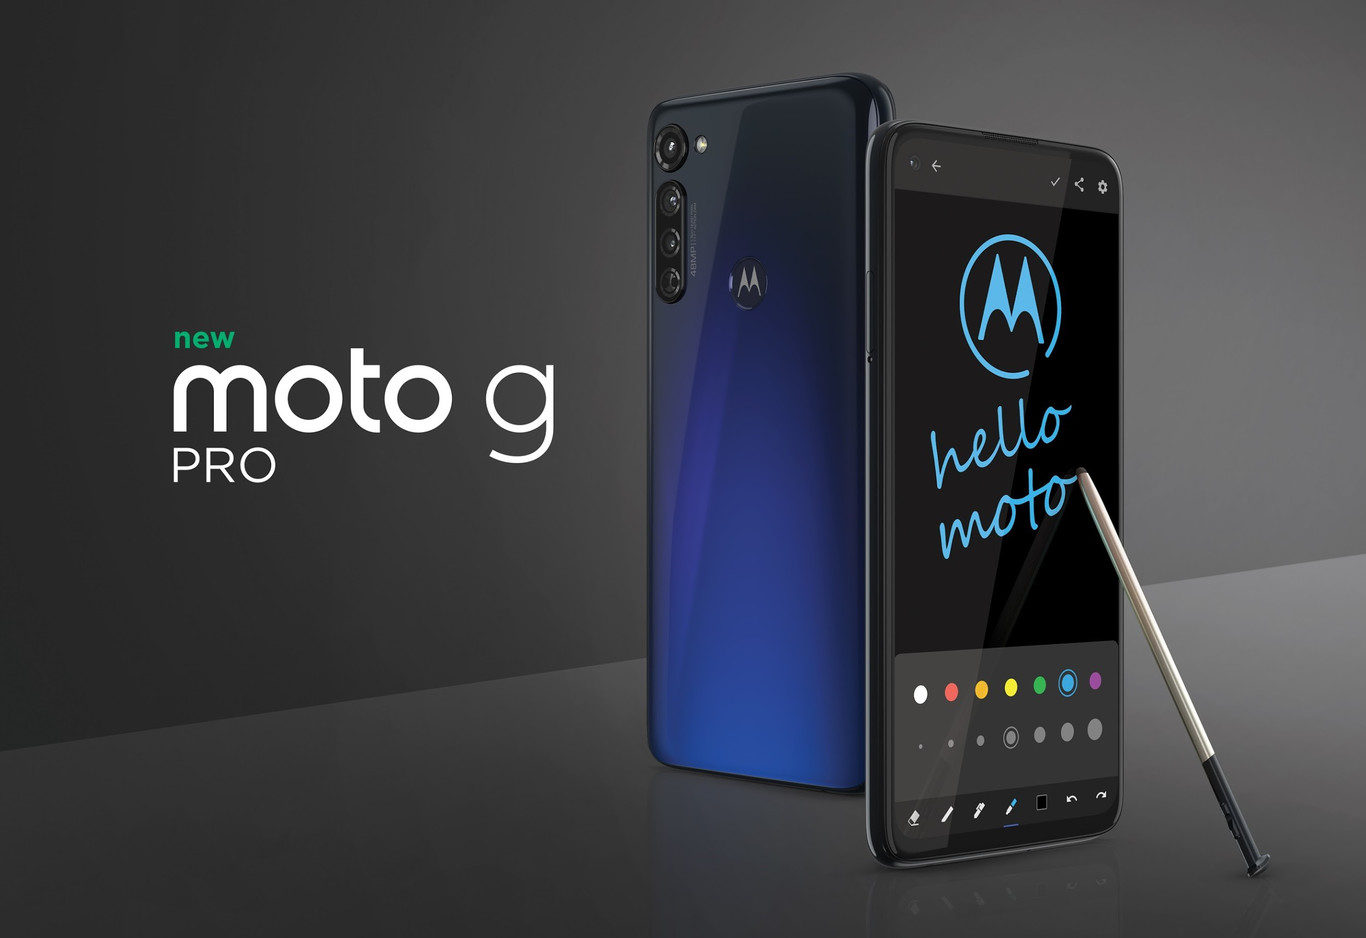 many improvements over the Moto G Pro – Papess